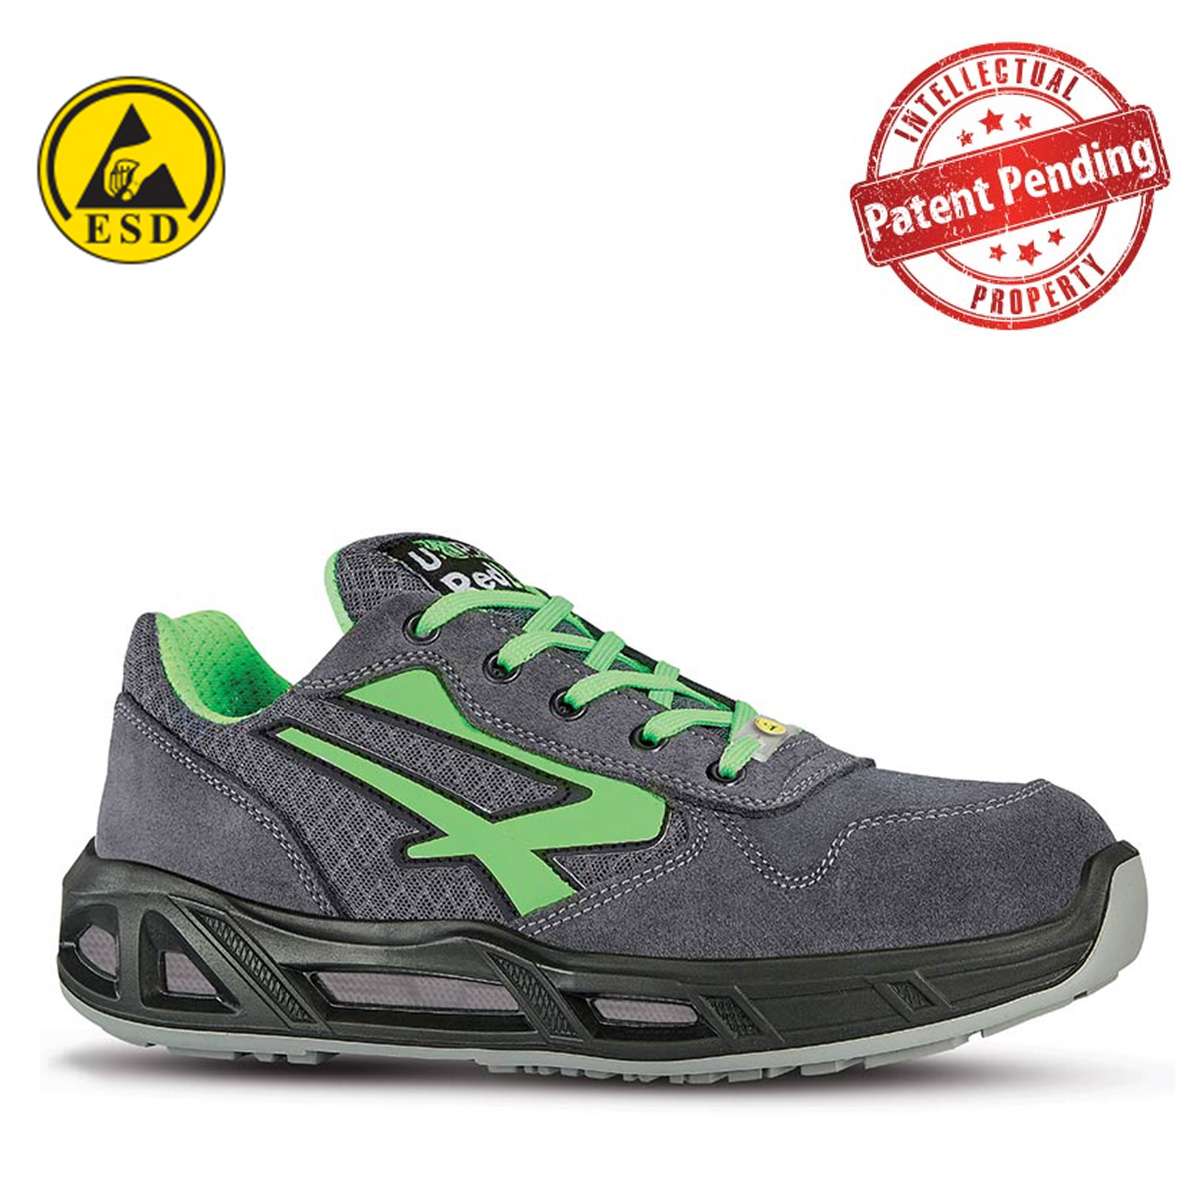 U-Power Rio S1P SRC ESD work sneakers only £ 54.69